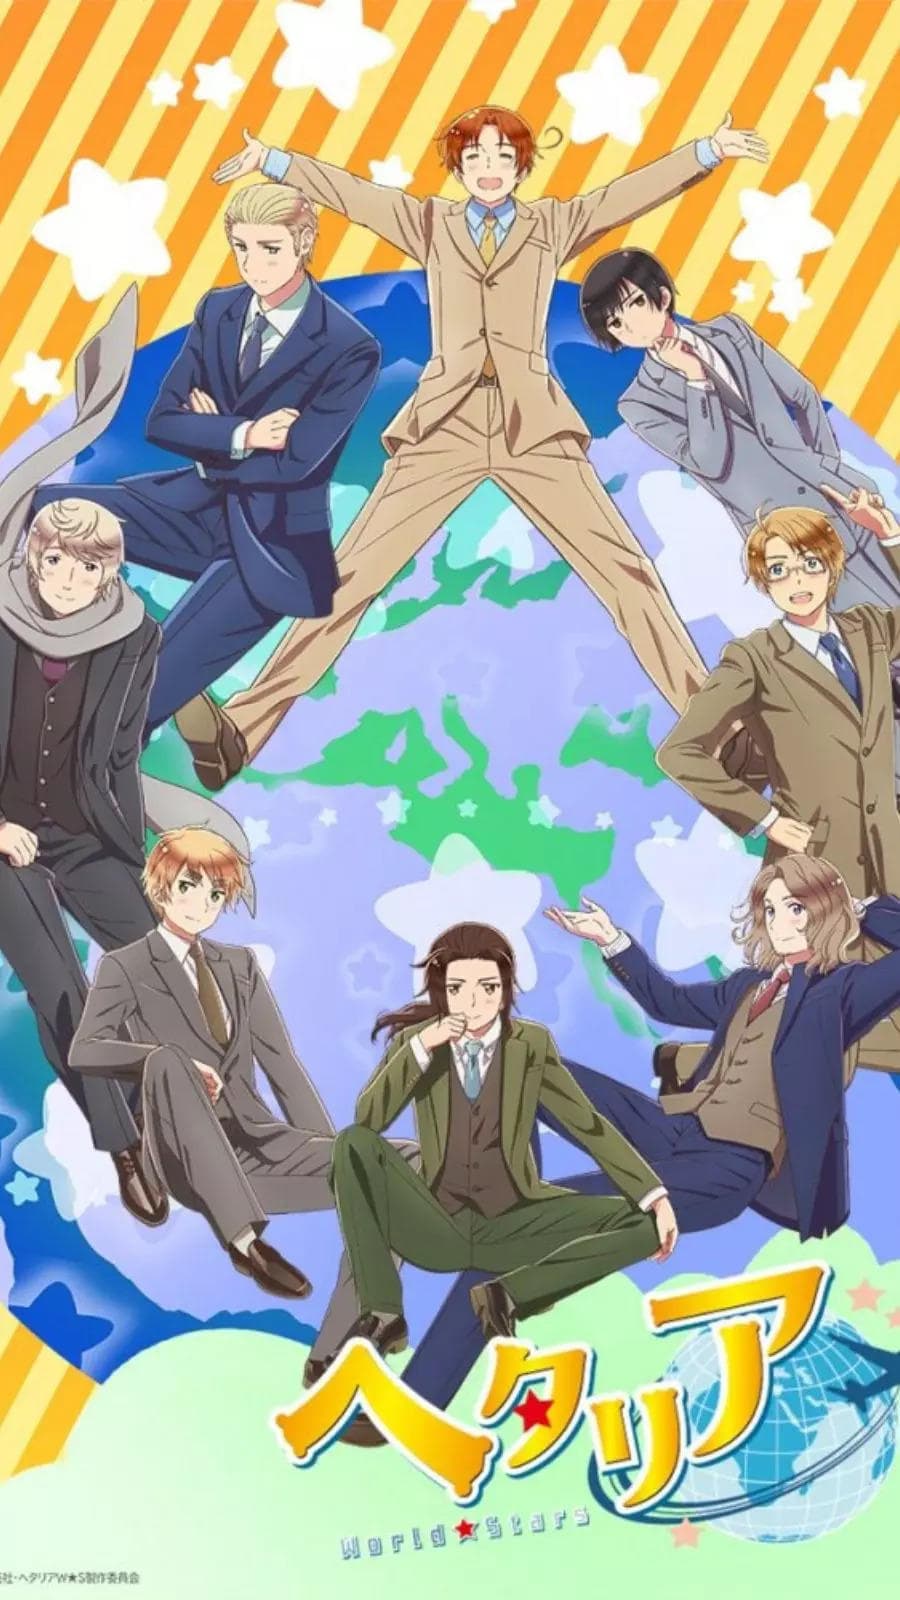 Anime Comedy Gold: Top 10 Hilarious Shows You Need To Watch Right Now